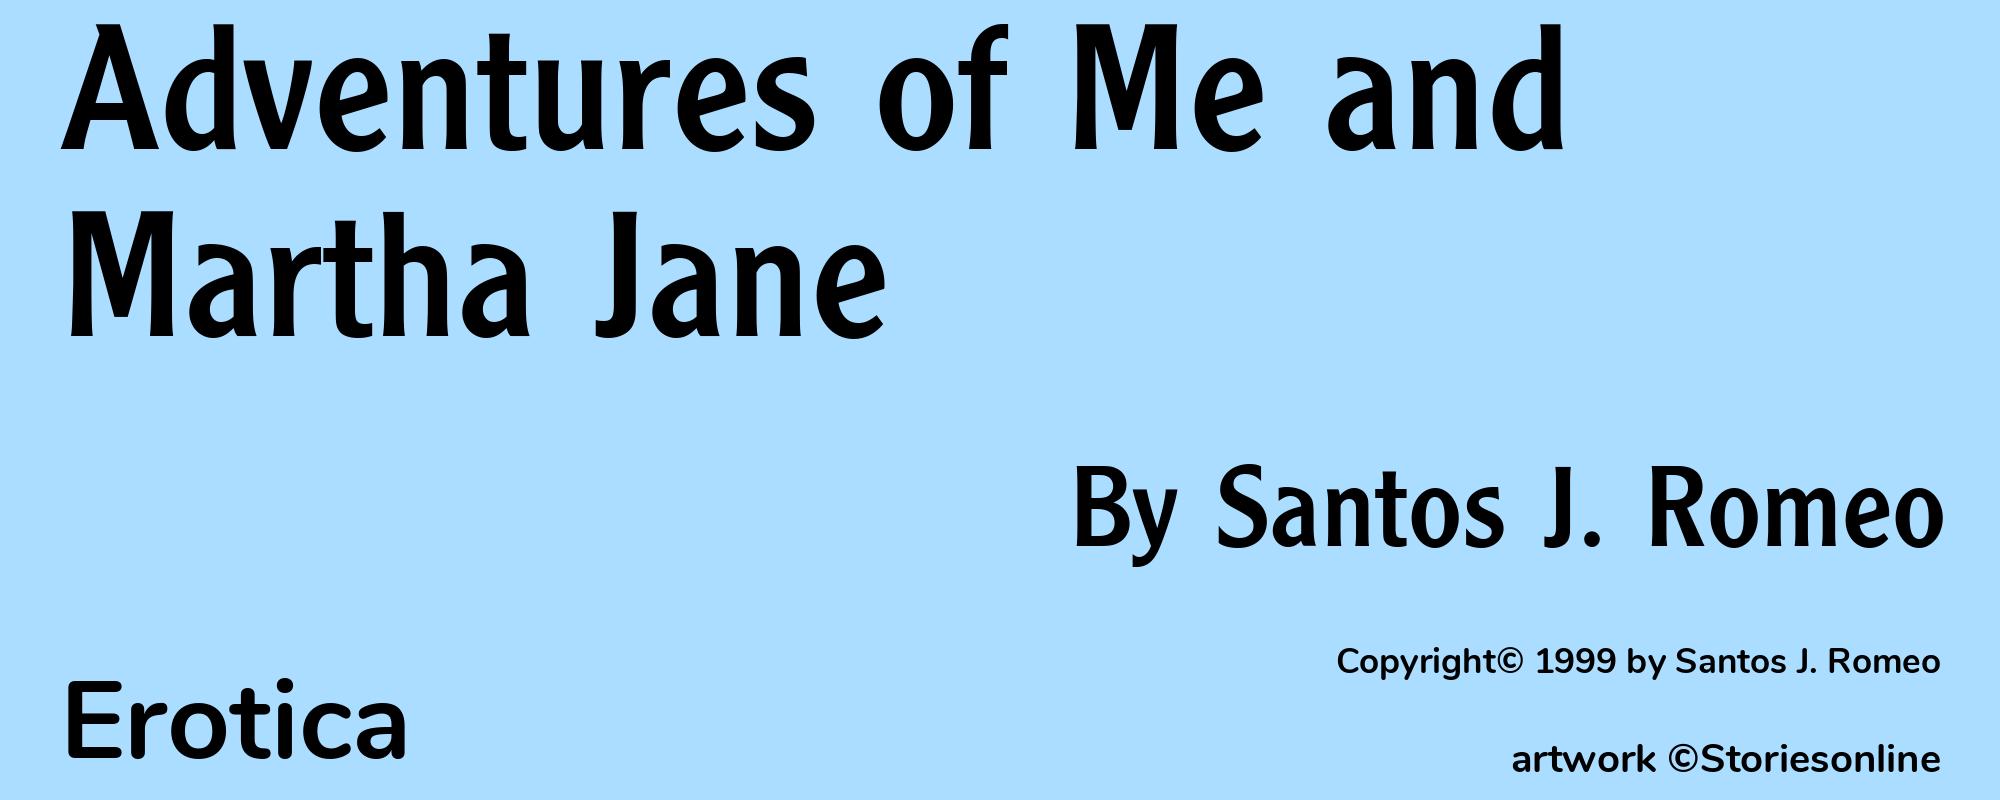 Adventures of Me and Martha Jane - Cover